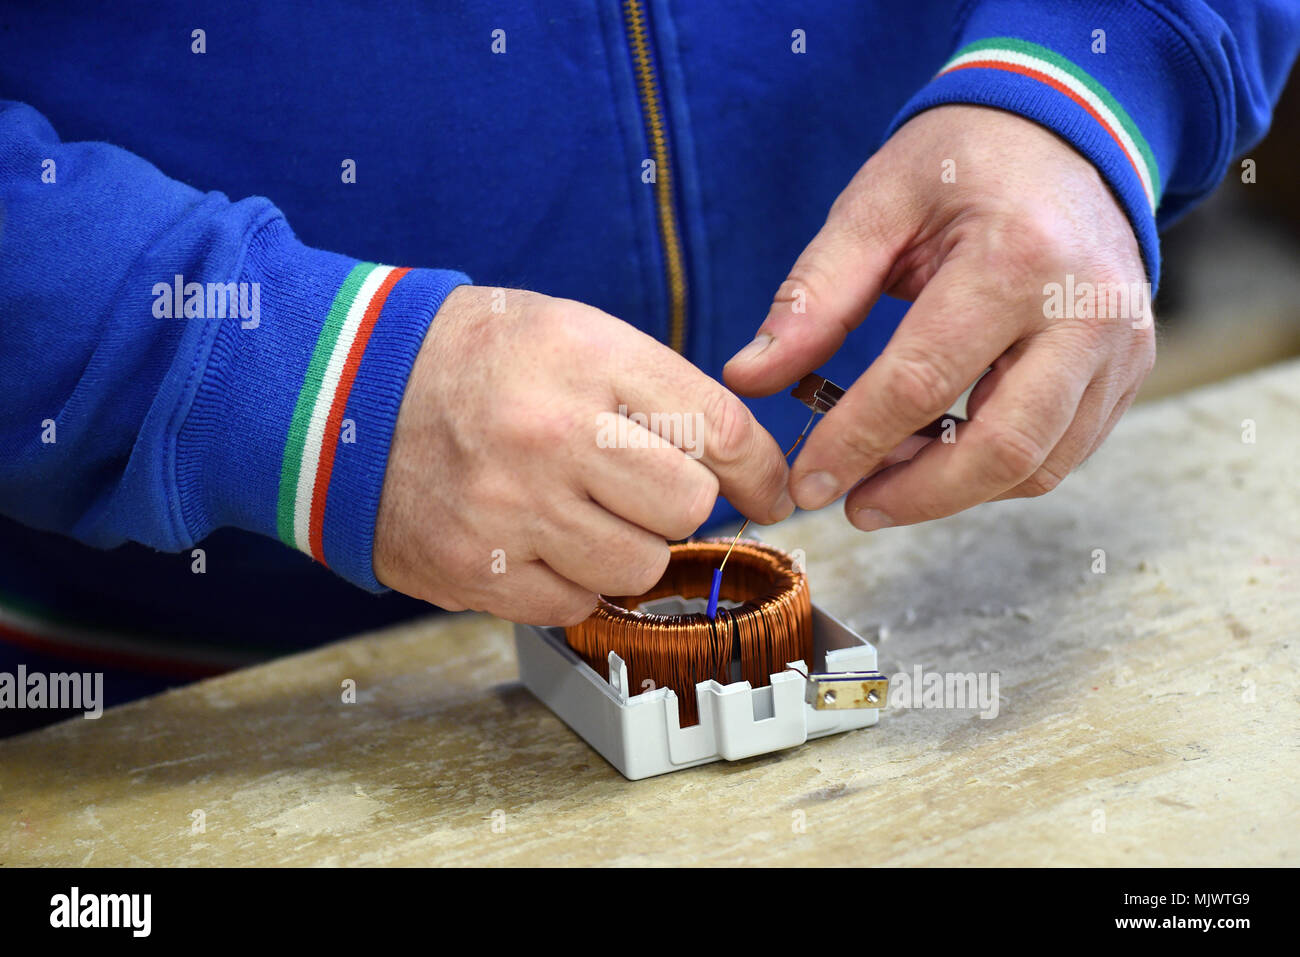 Close up view of man working at assembling line with electric components Stock Photo